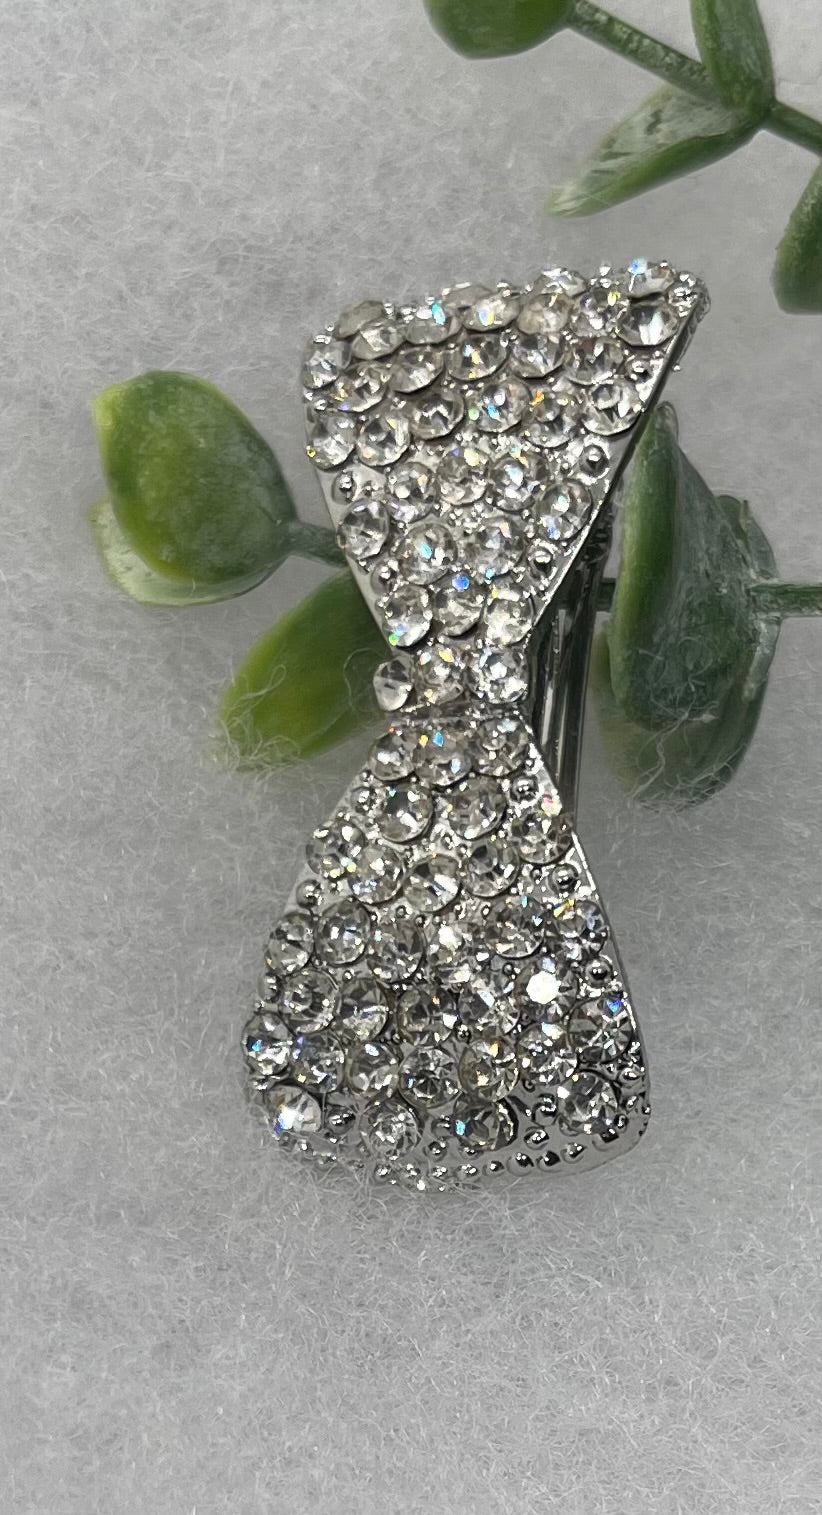 Bow Clear Crystal Rhinestone bow Barrette approximately 2.5” Metal silver tone formal hair accessory gift wedding bridal shower accessories